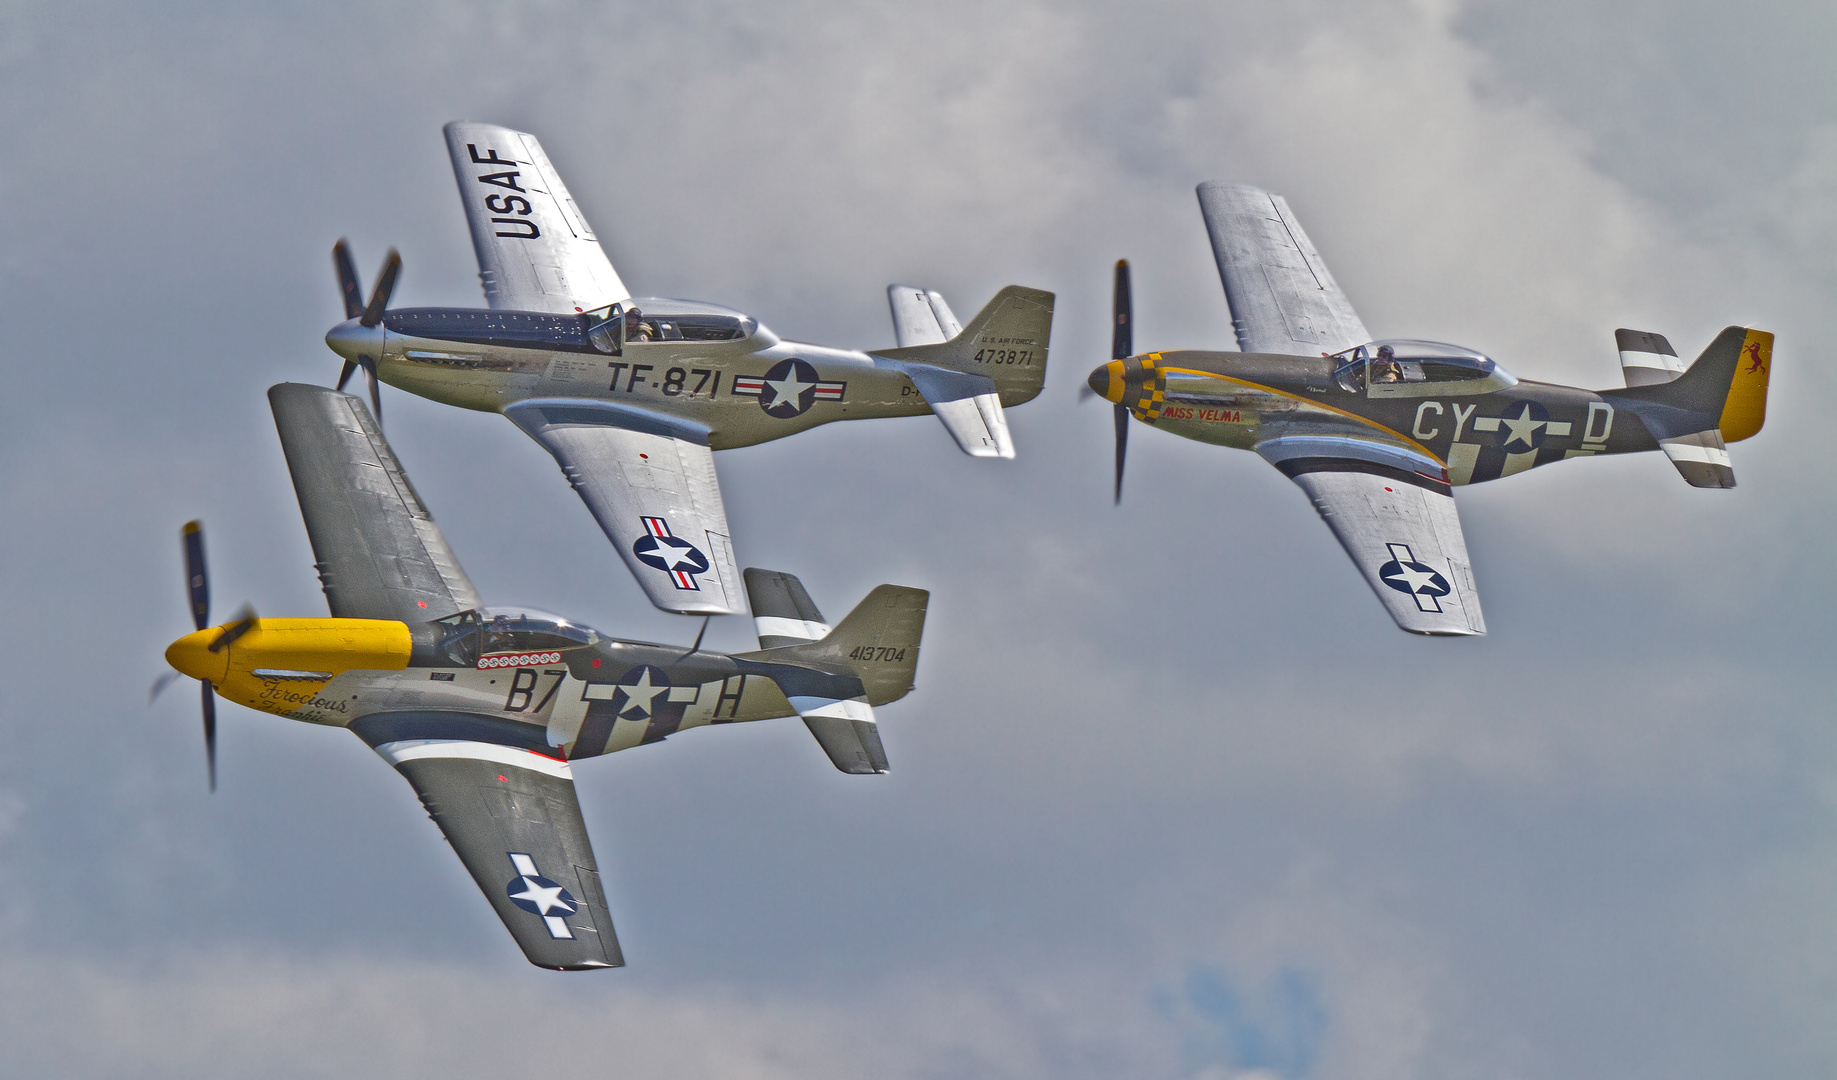 3 * Mustang - Duxford - Flying Legends - 1.July 2012